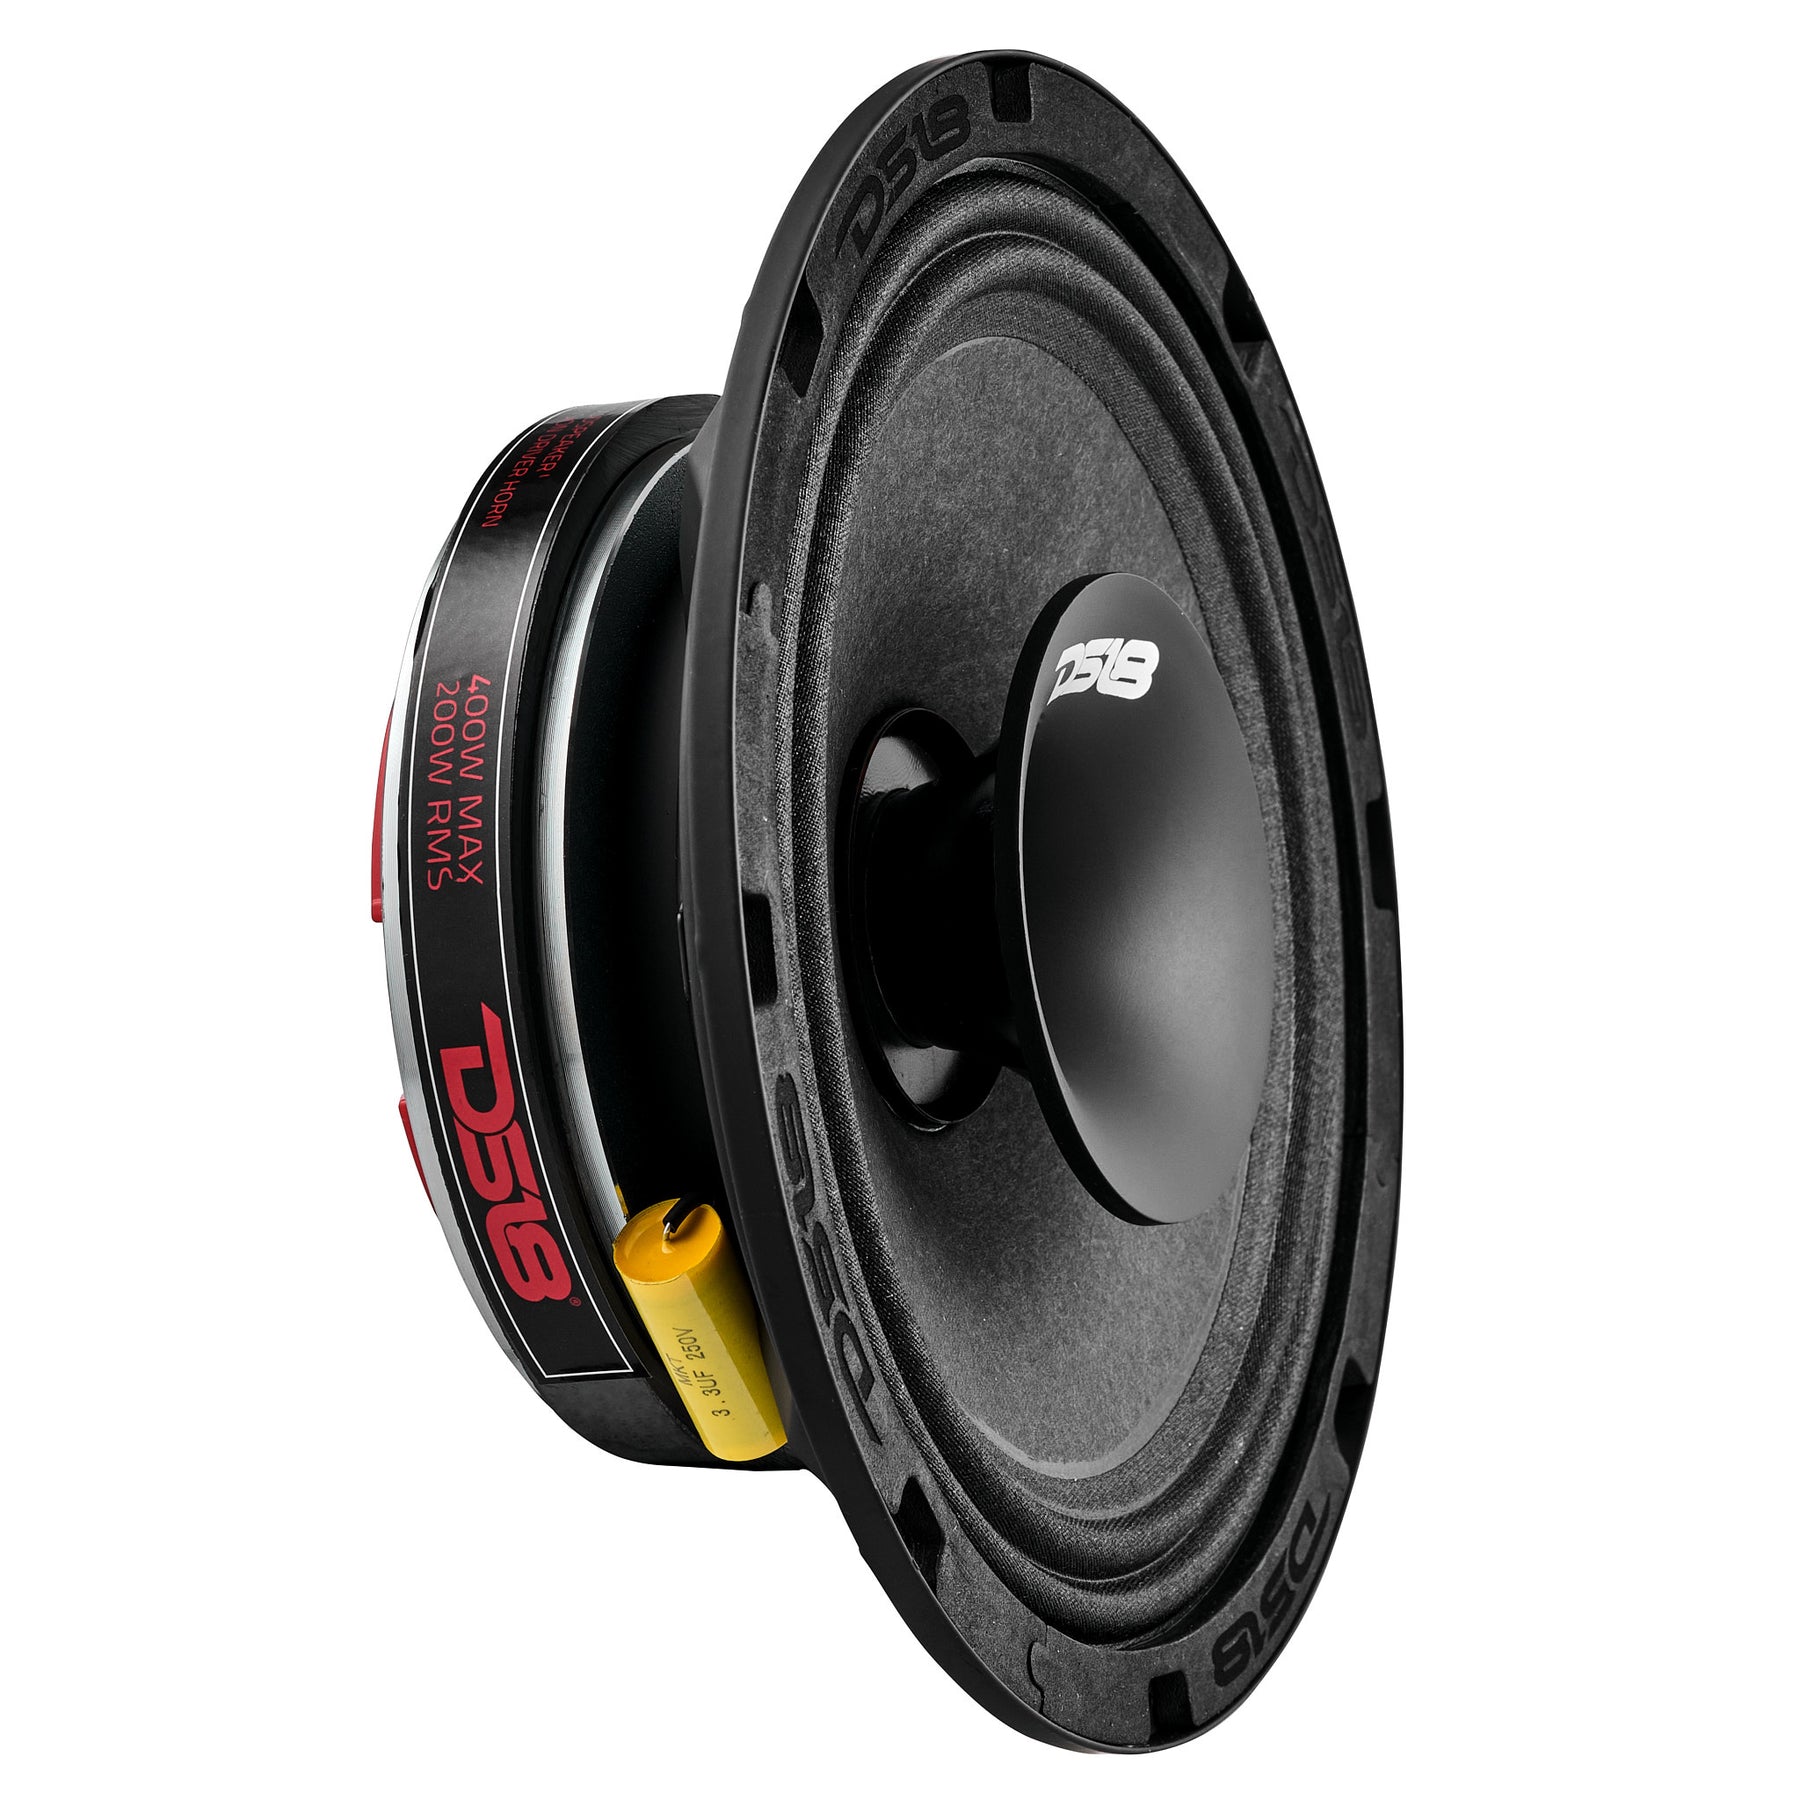 PRO 8" Shallow Coaxial Hybrid Mid-Range Loudspeaker with Built-in Driver 200 Watts Rms 4-Ohm - Grill Included